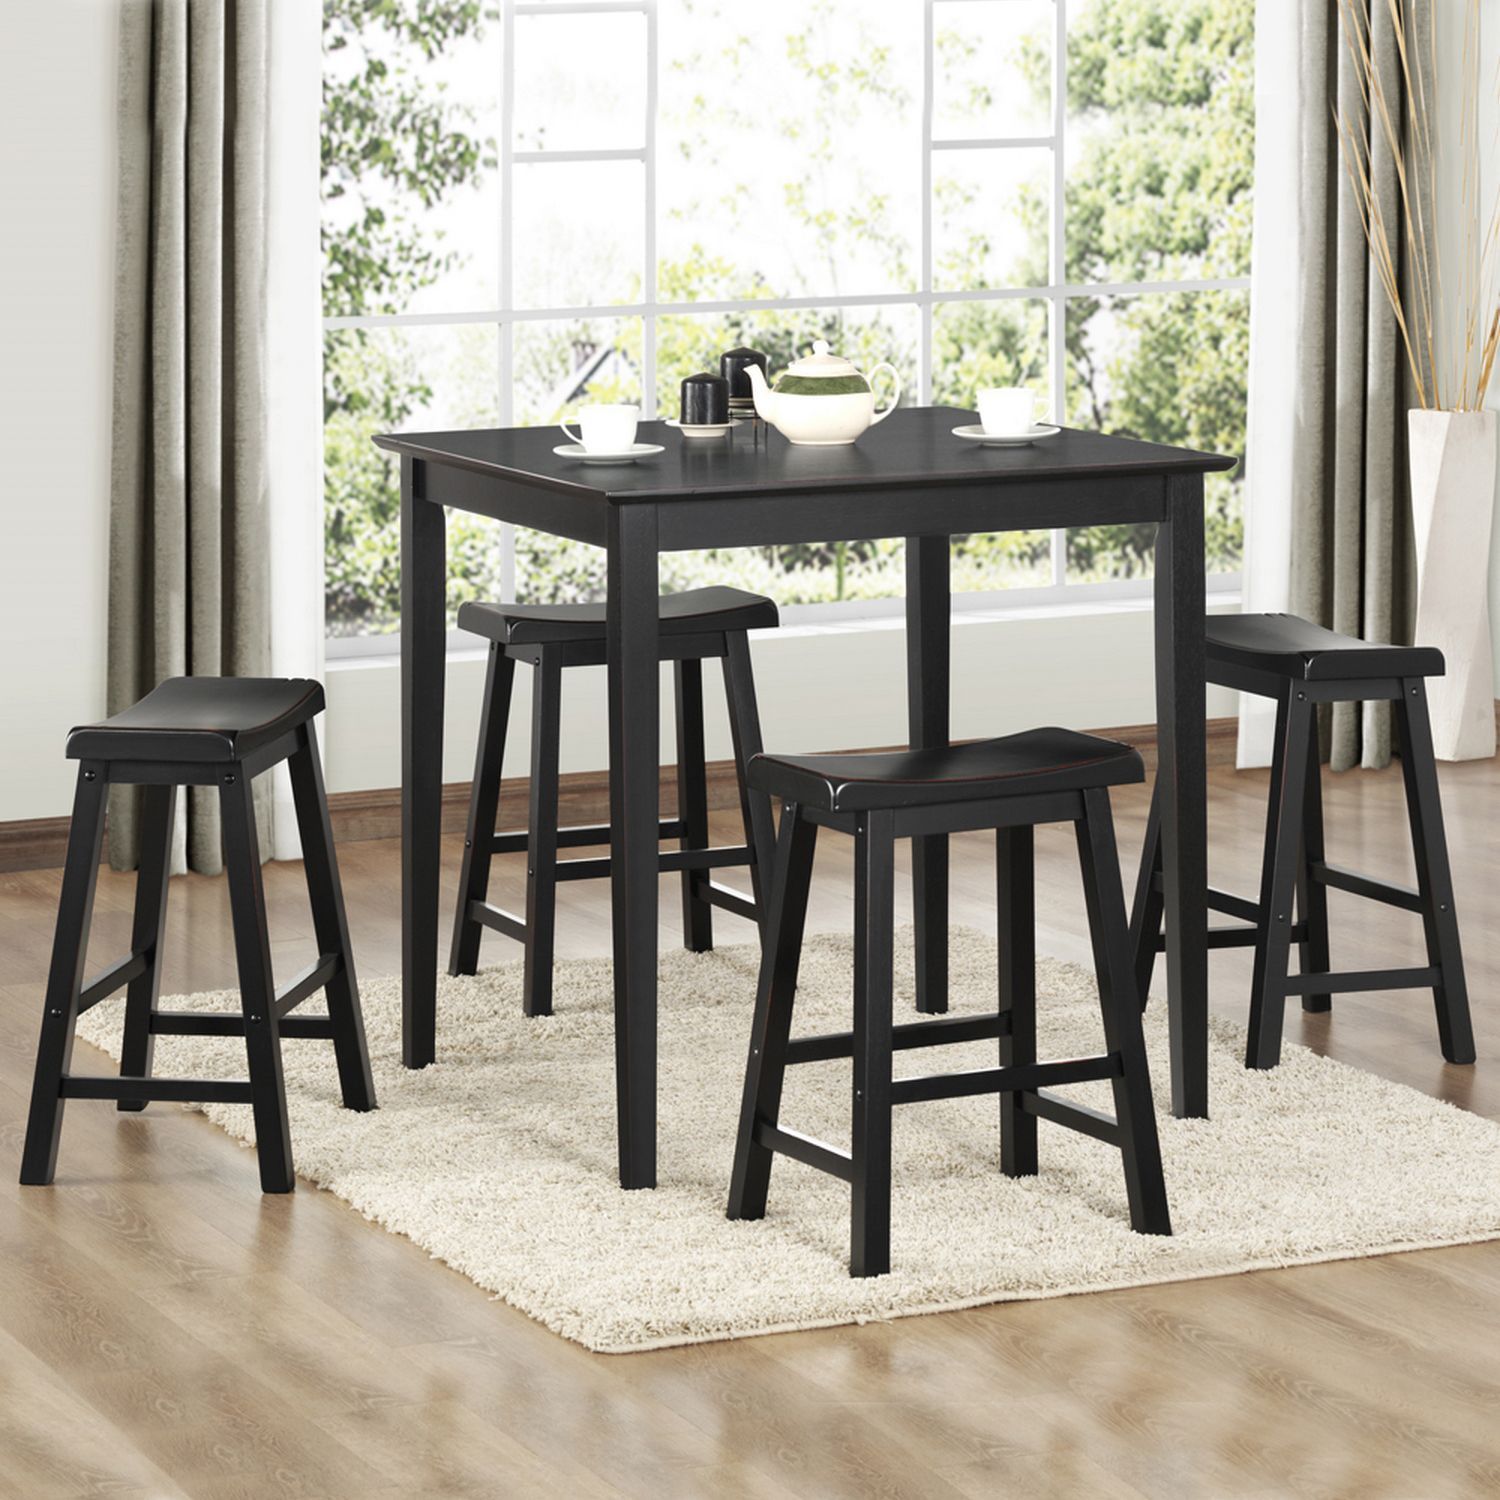 Pigtail reccomend Asian pub table chairs black